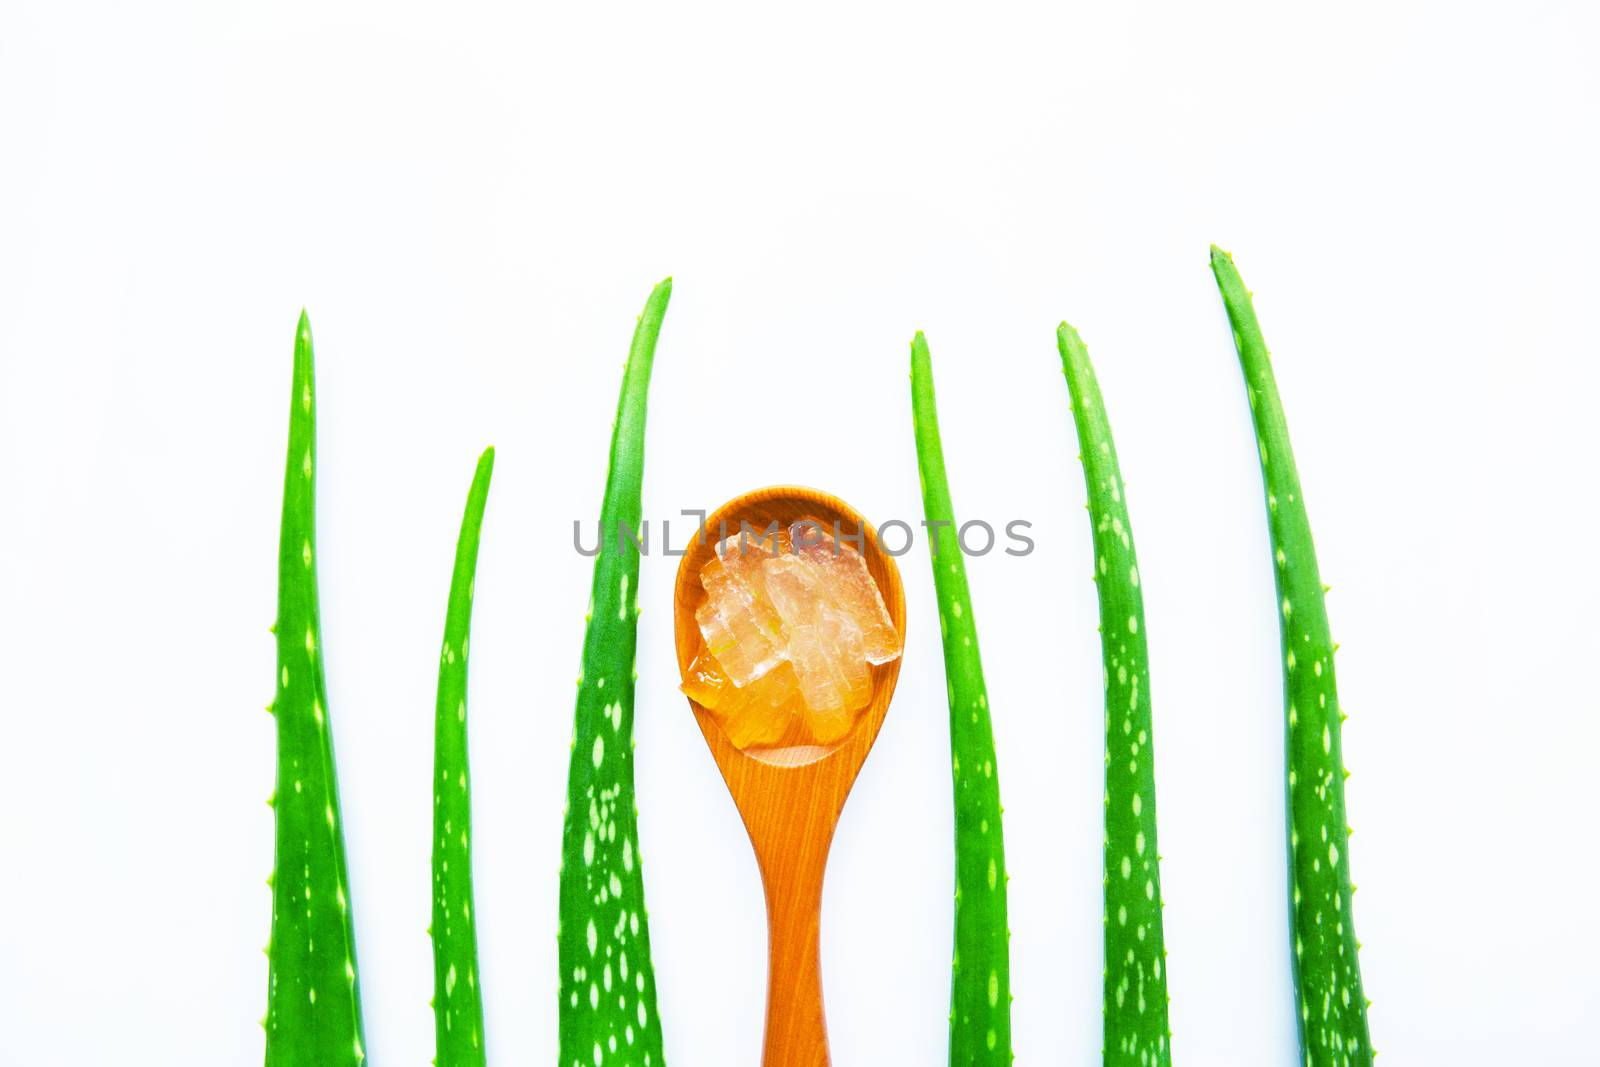 Aloe vera fresh leaves with slices and aloe vera gel on wooden s by Bowonpat